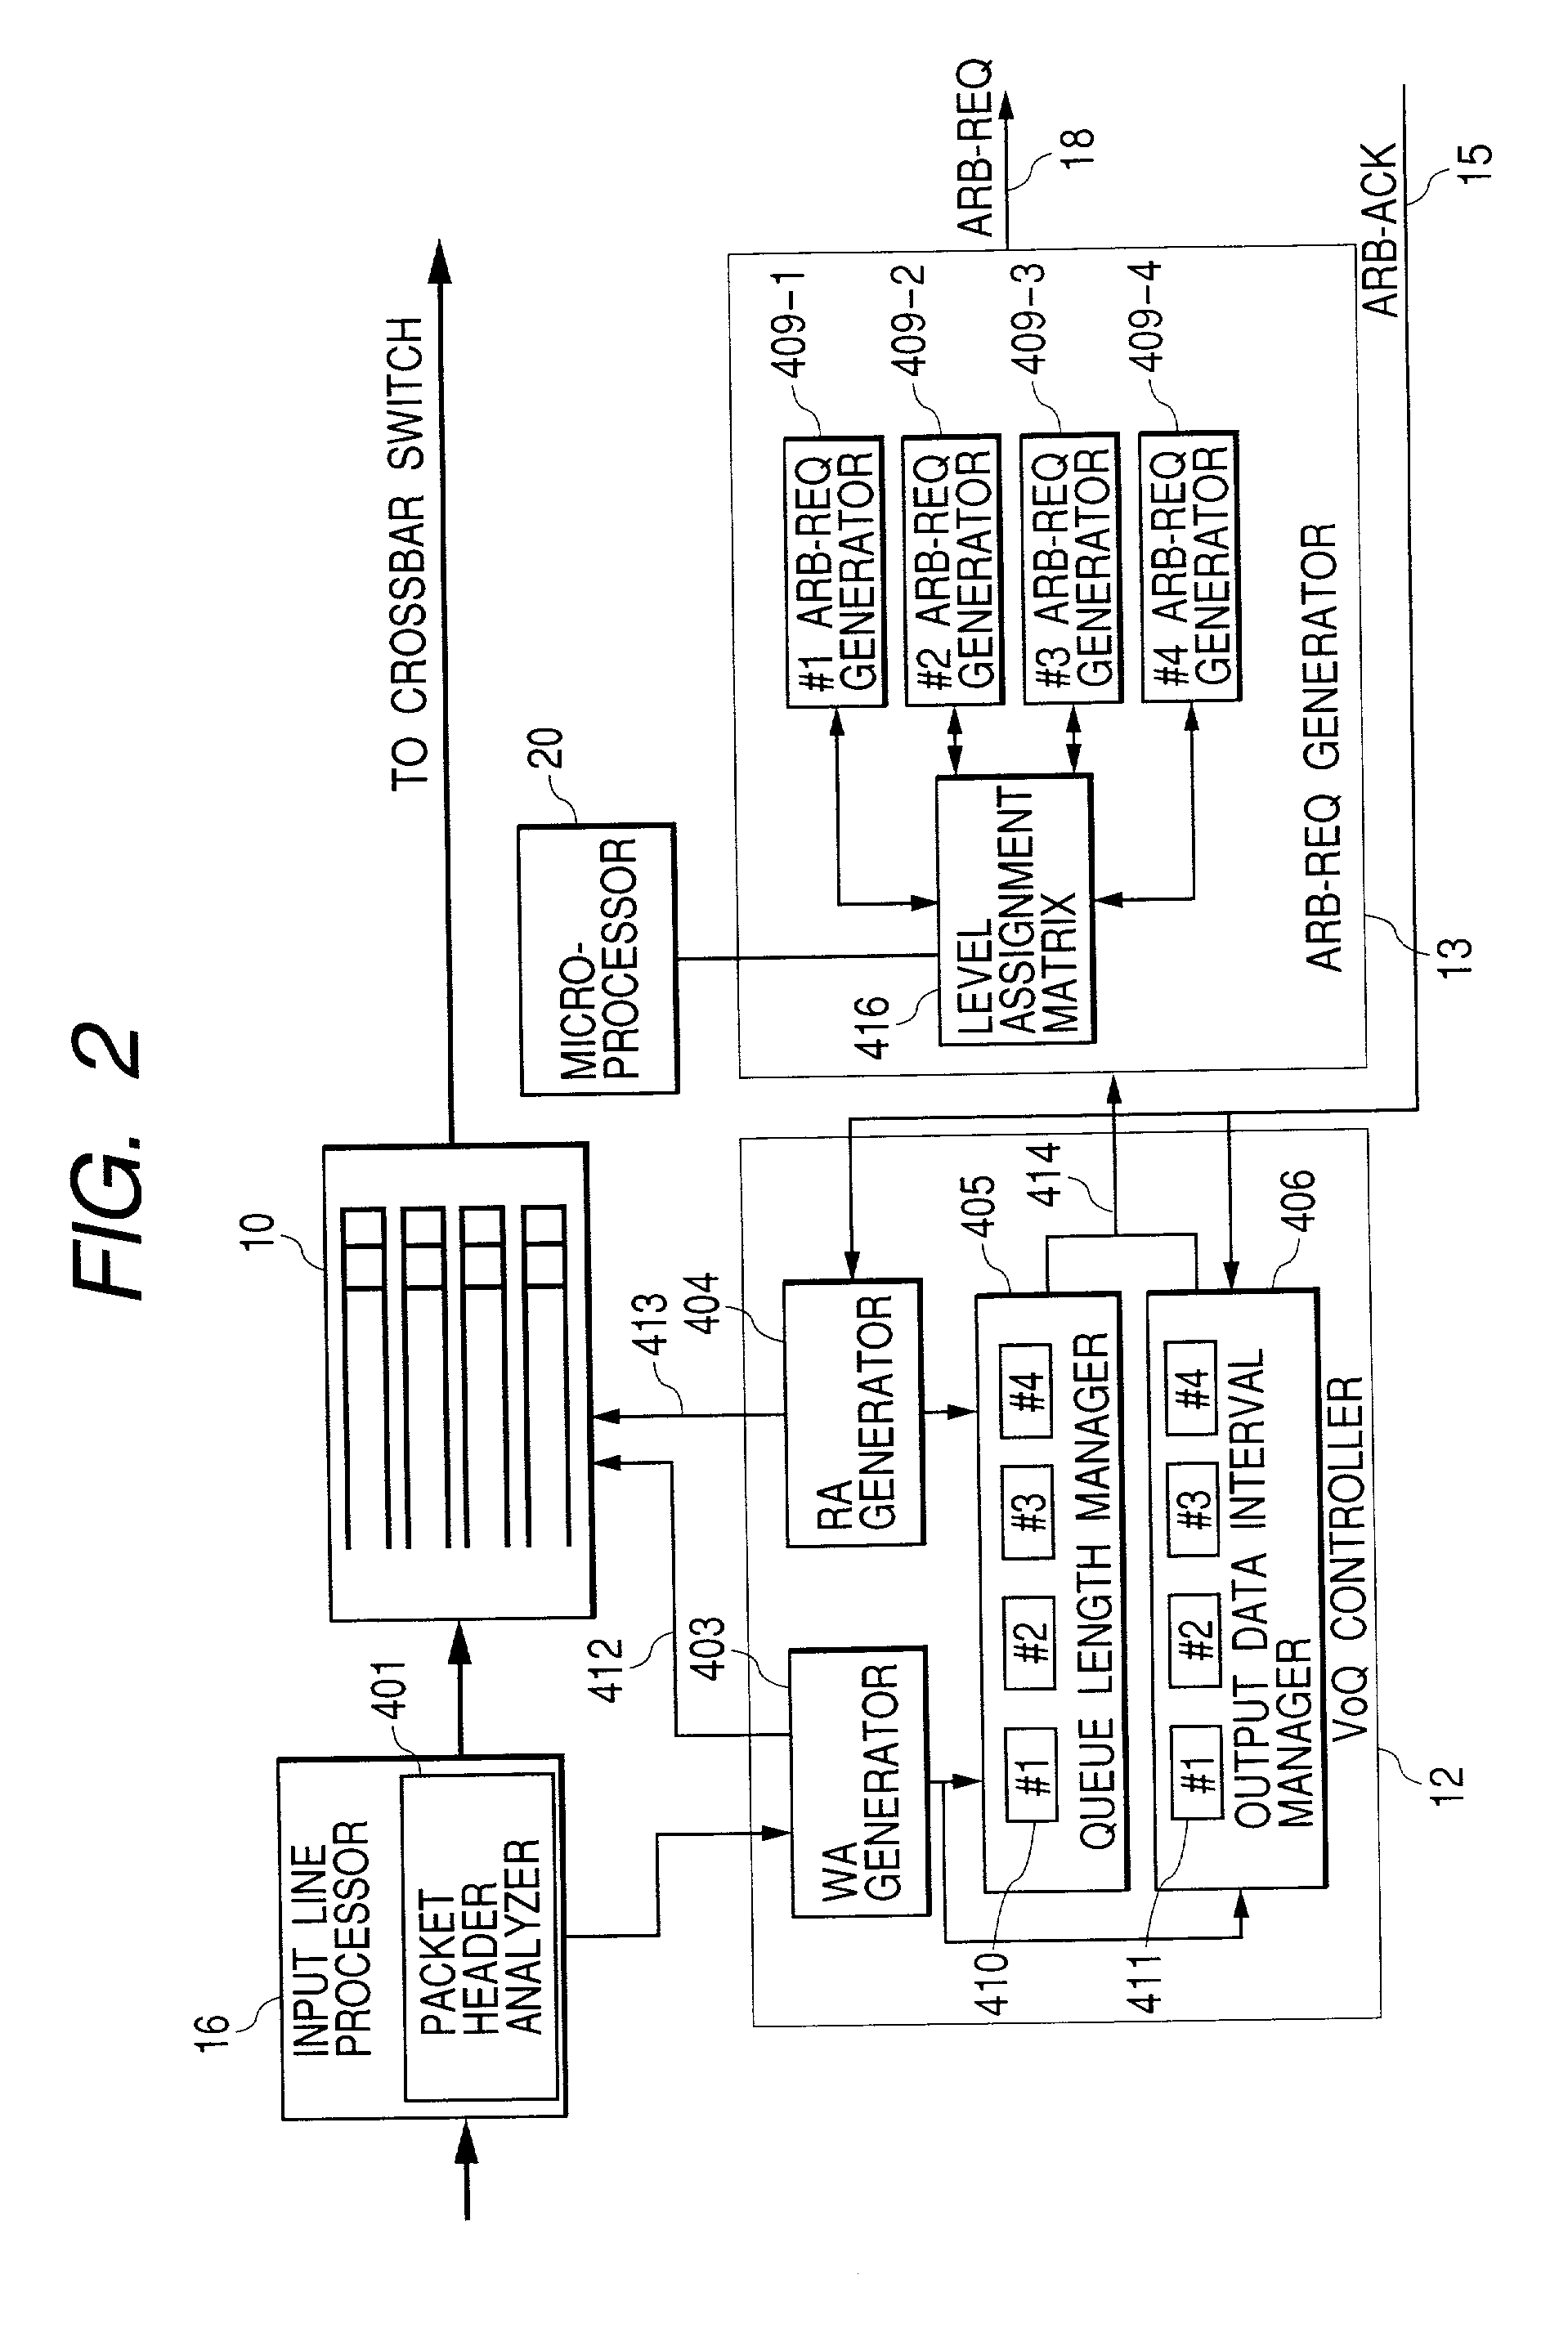 Packet switching system